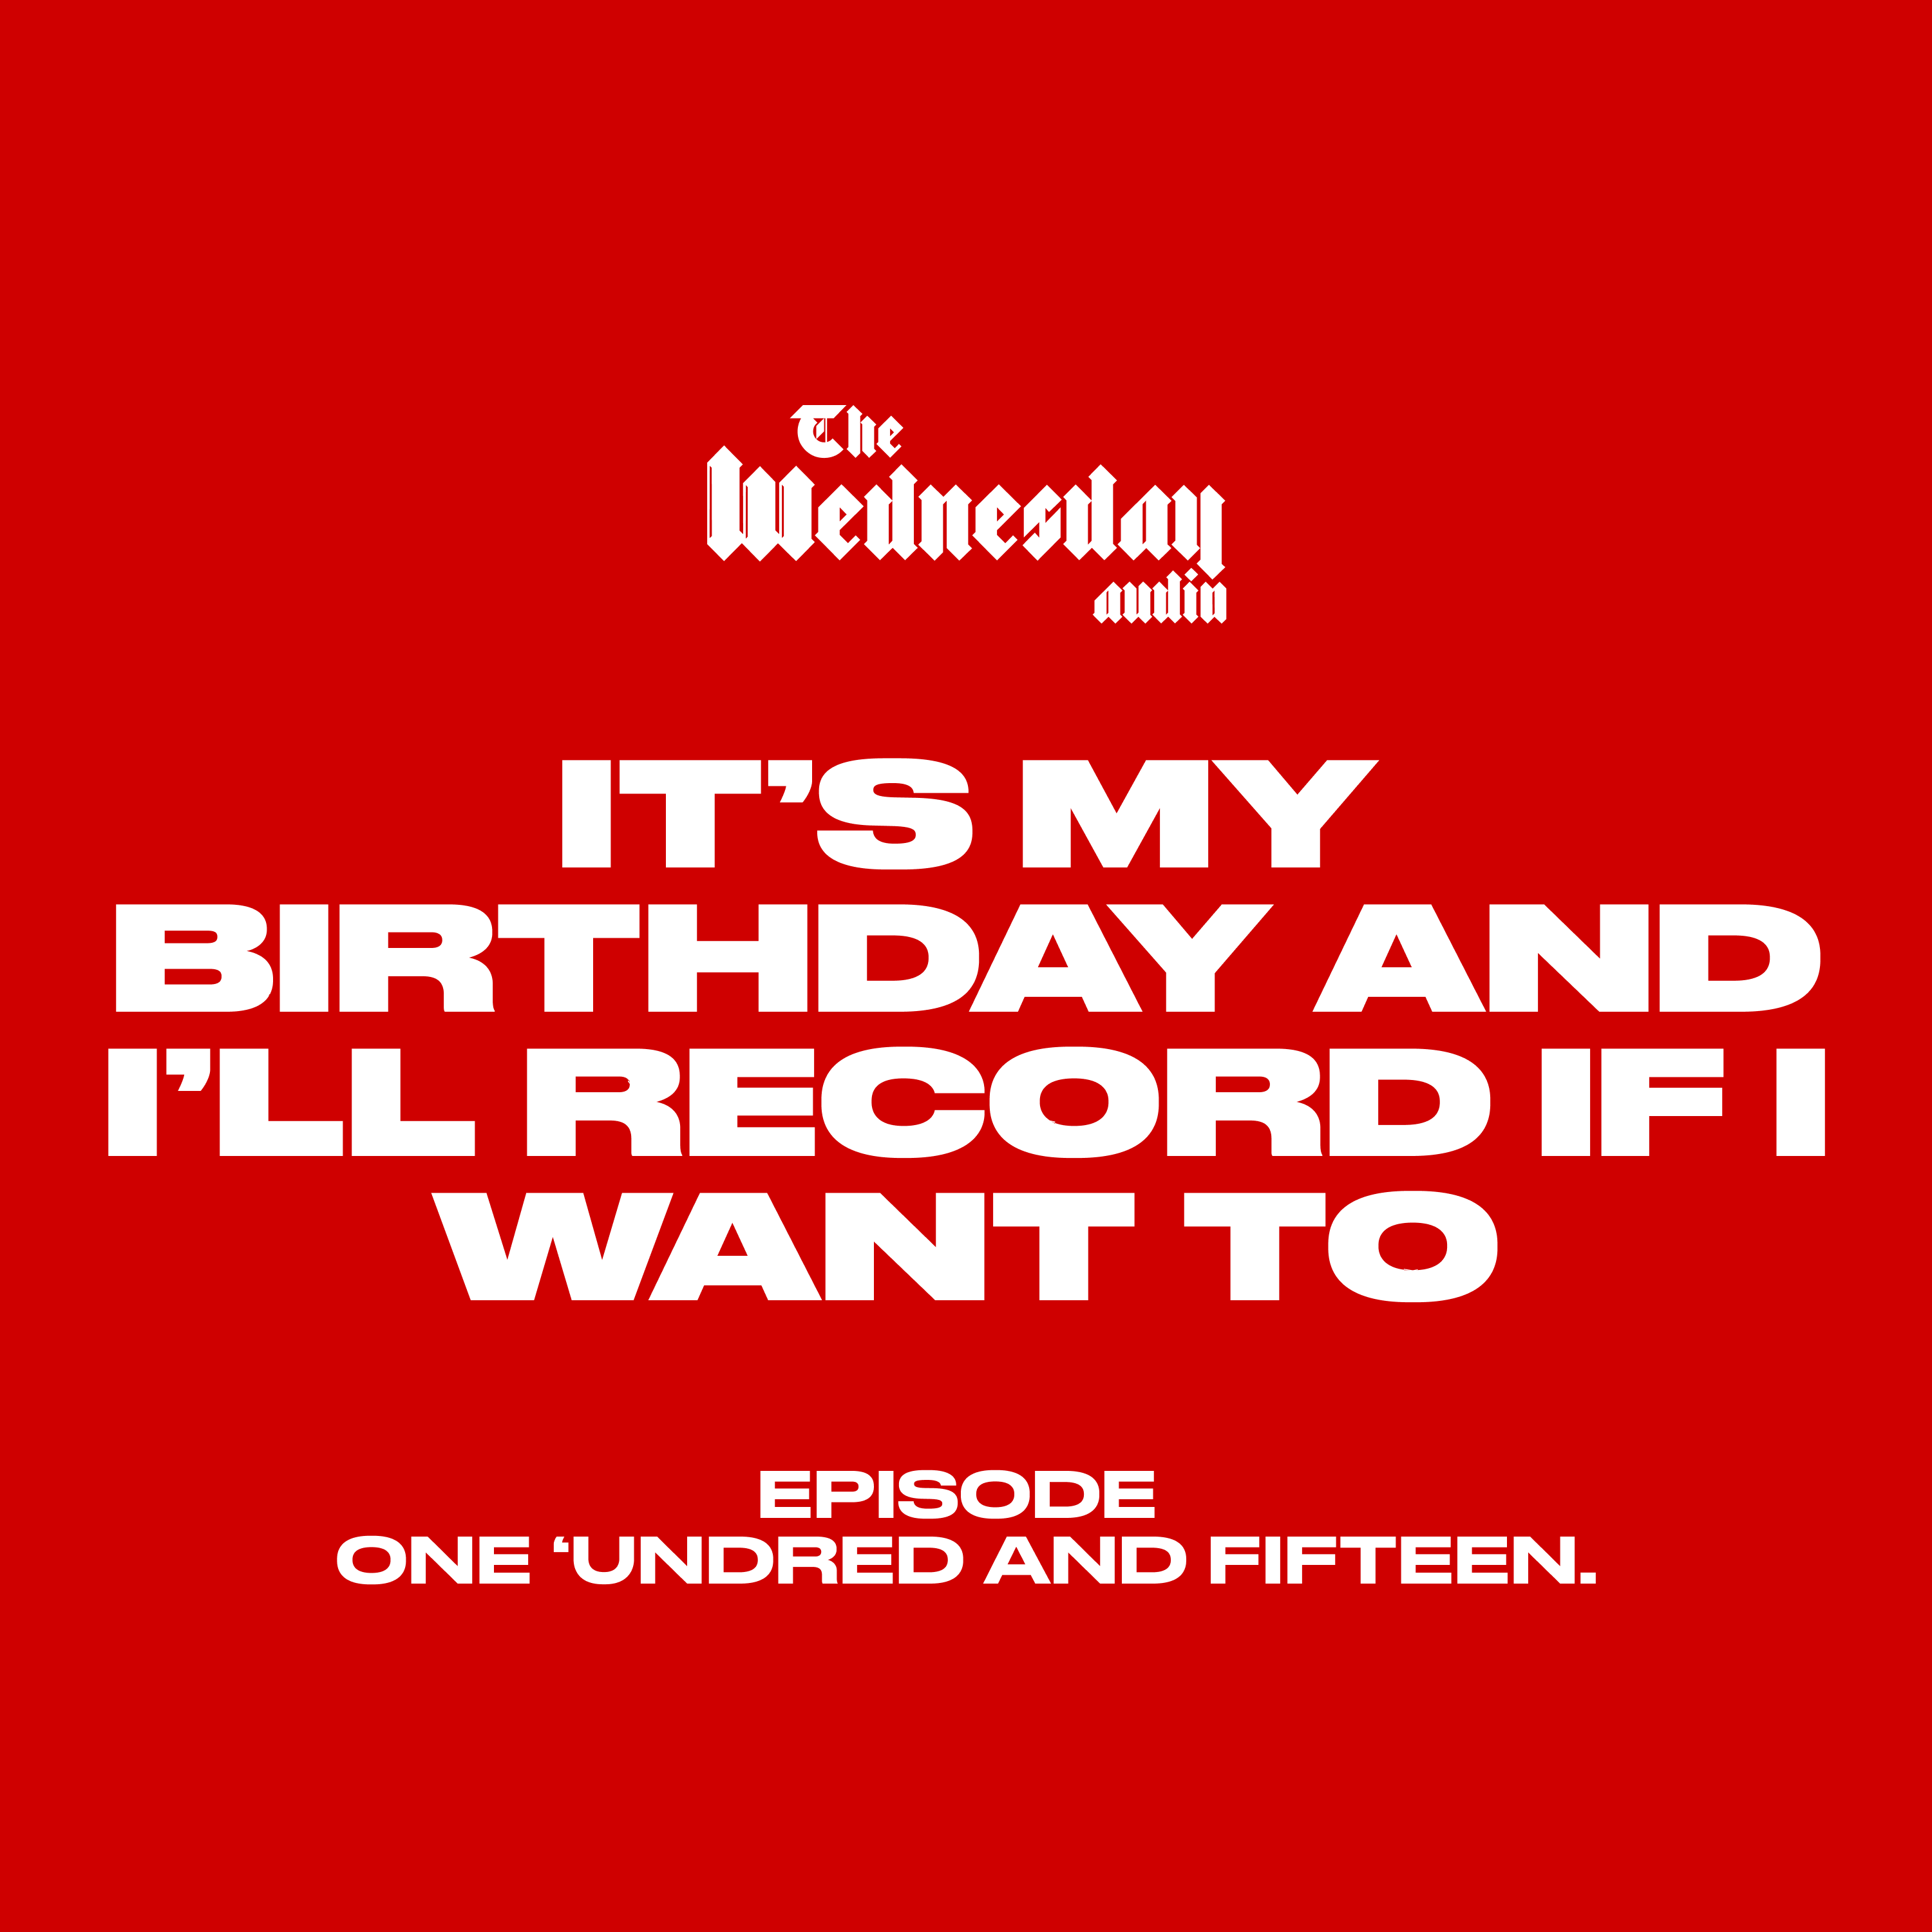 It’s my birthday and I’ll record if I want to